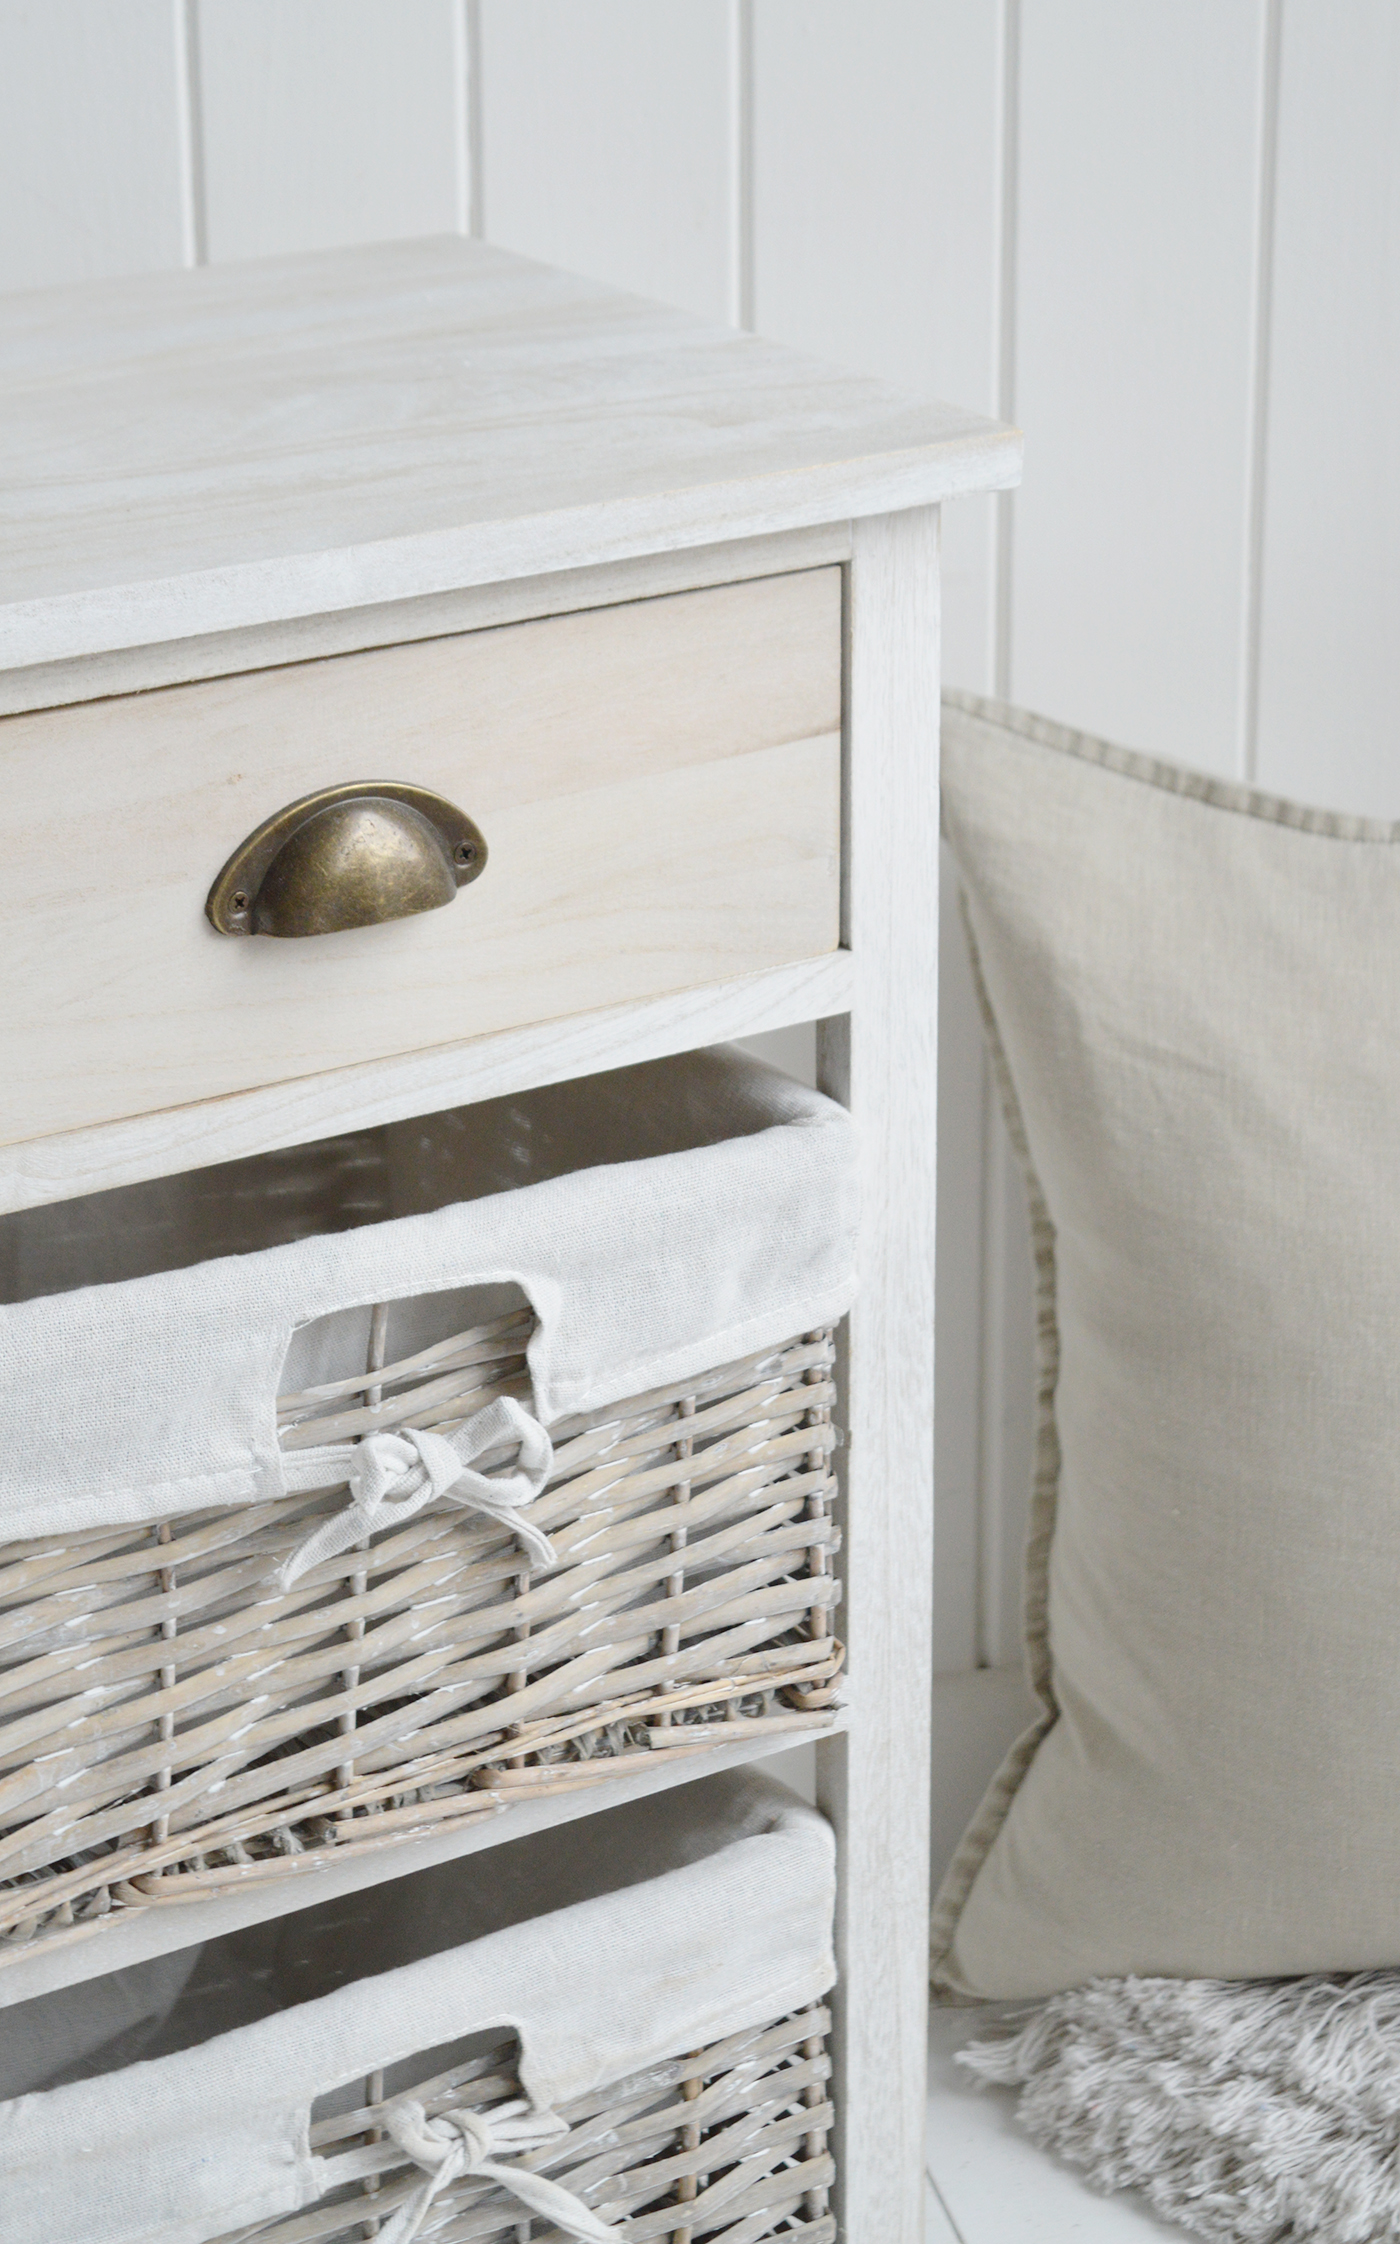 Dorset Cabinet with 3 Drawers in light grey washed wood - New England Coastal and Modern Country Furniture. Storage furniture with baskets, an ideal bedside lamp table